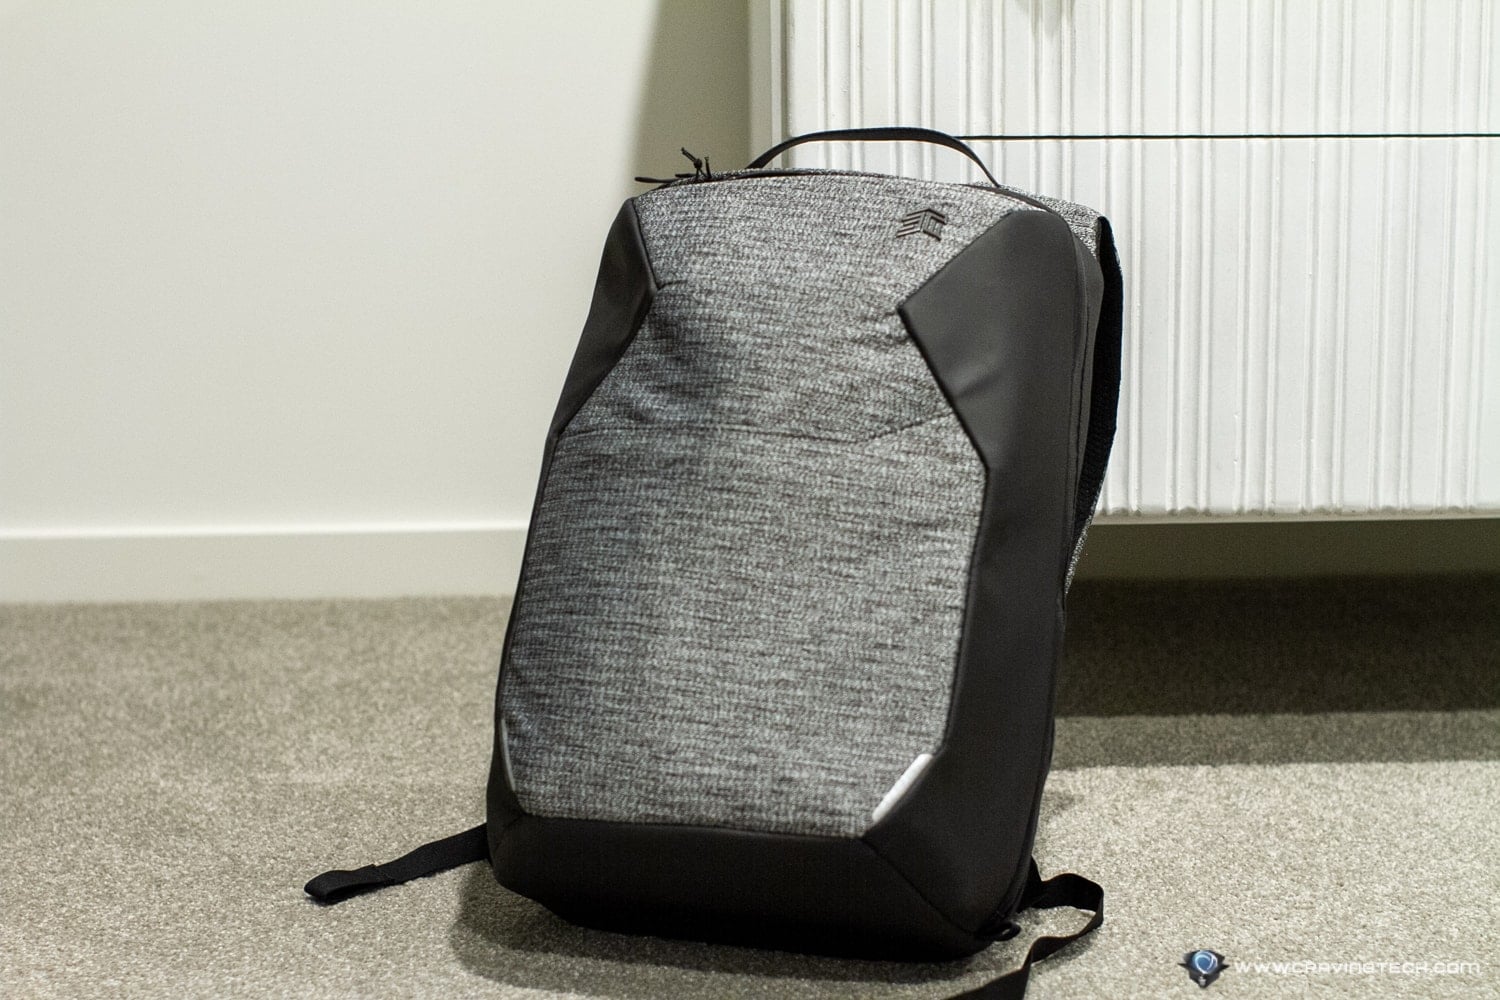 The stylish backpack for commuters – STM Myth 18L Backpack Review